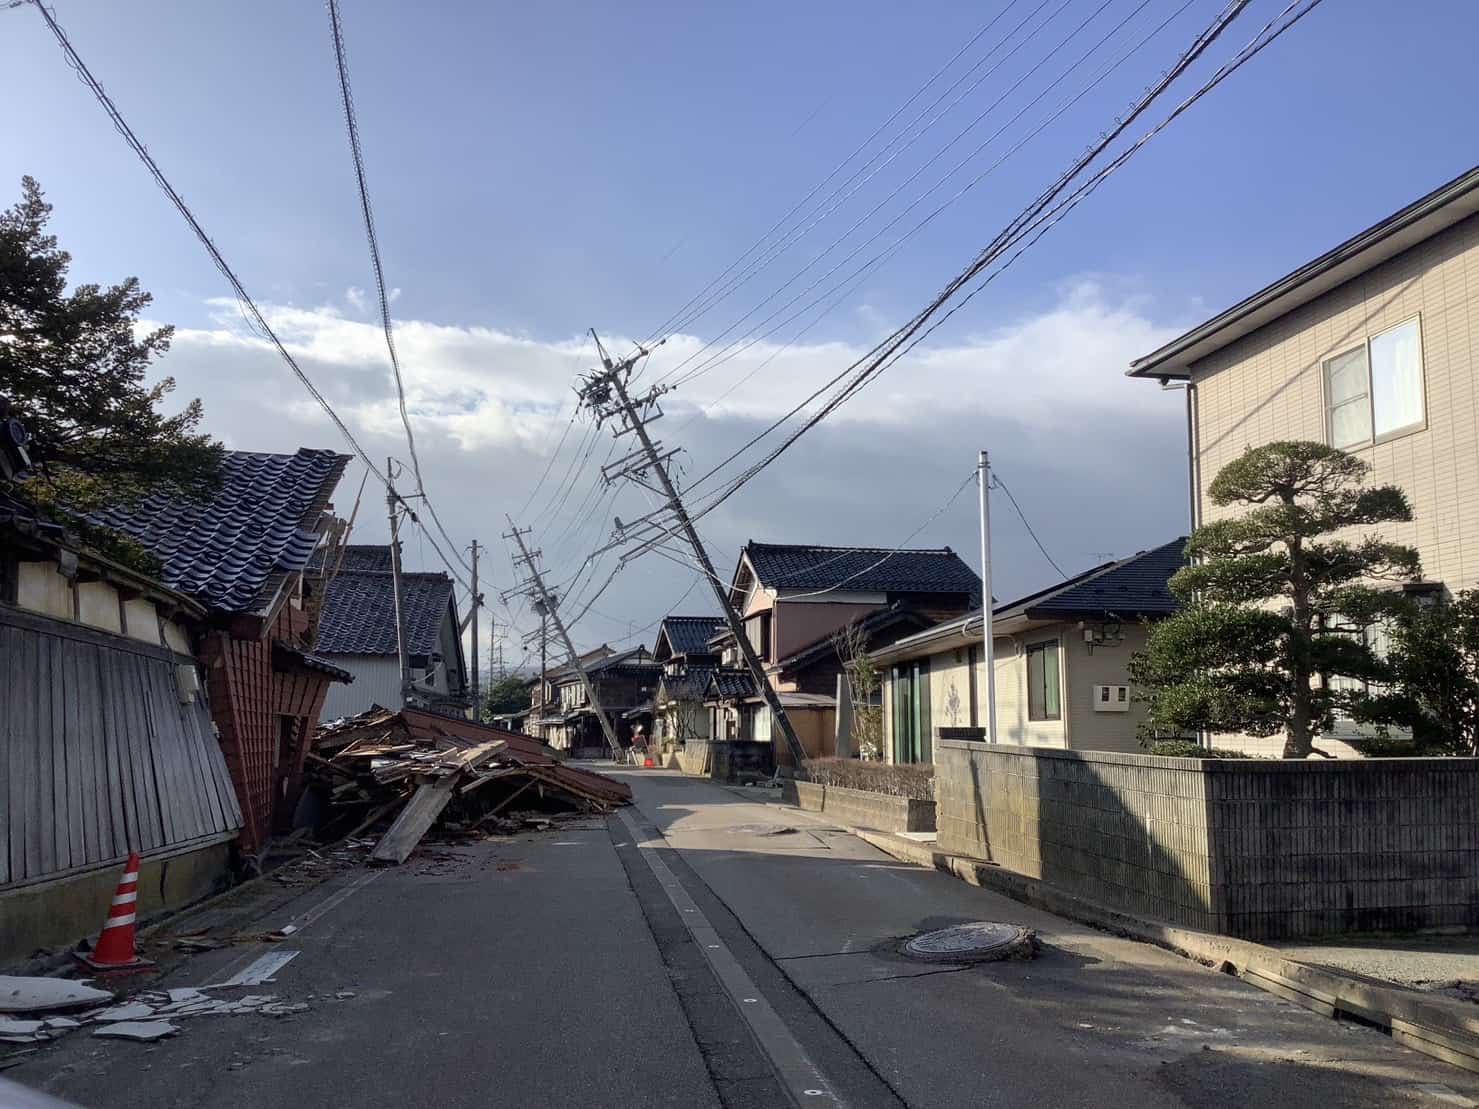 Japan’s Noto Earthquake: ADRA Mobilizes Urgent Relief and Recovery Efforts to Aid Japanese Communities